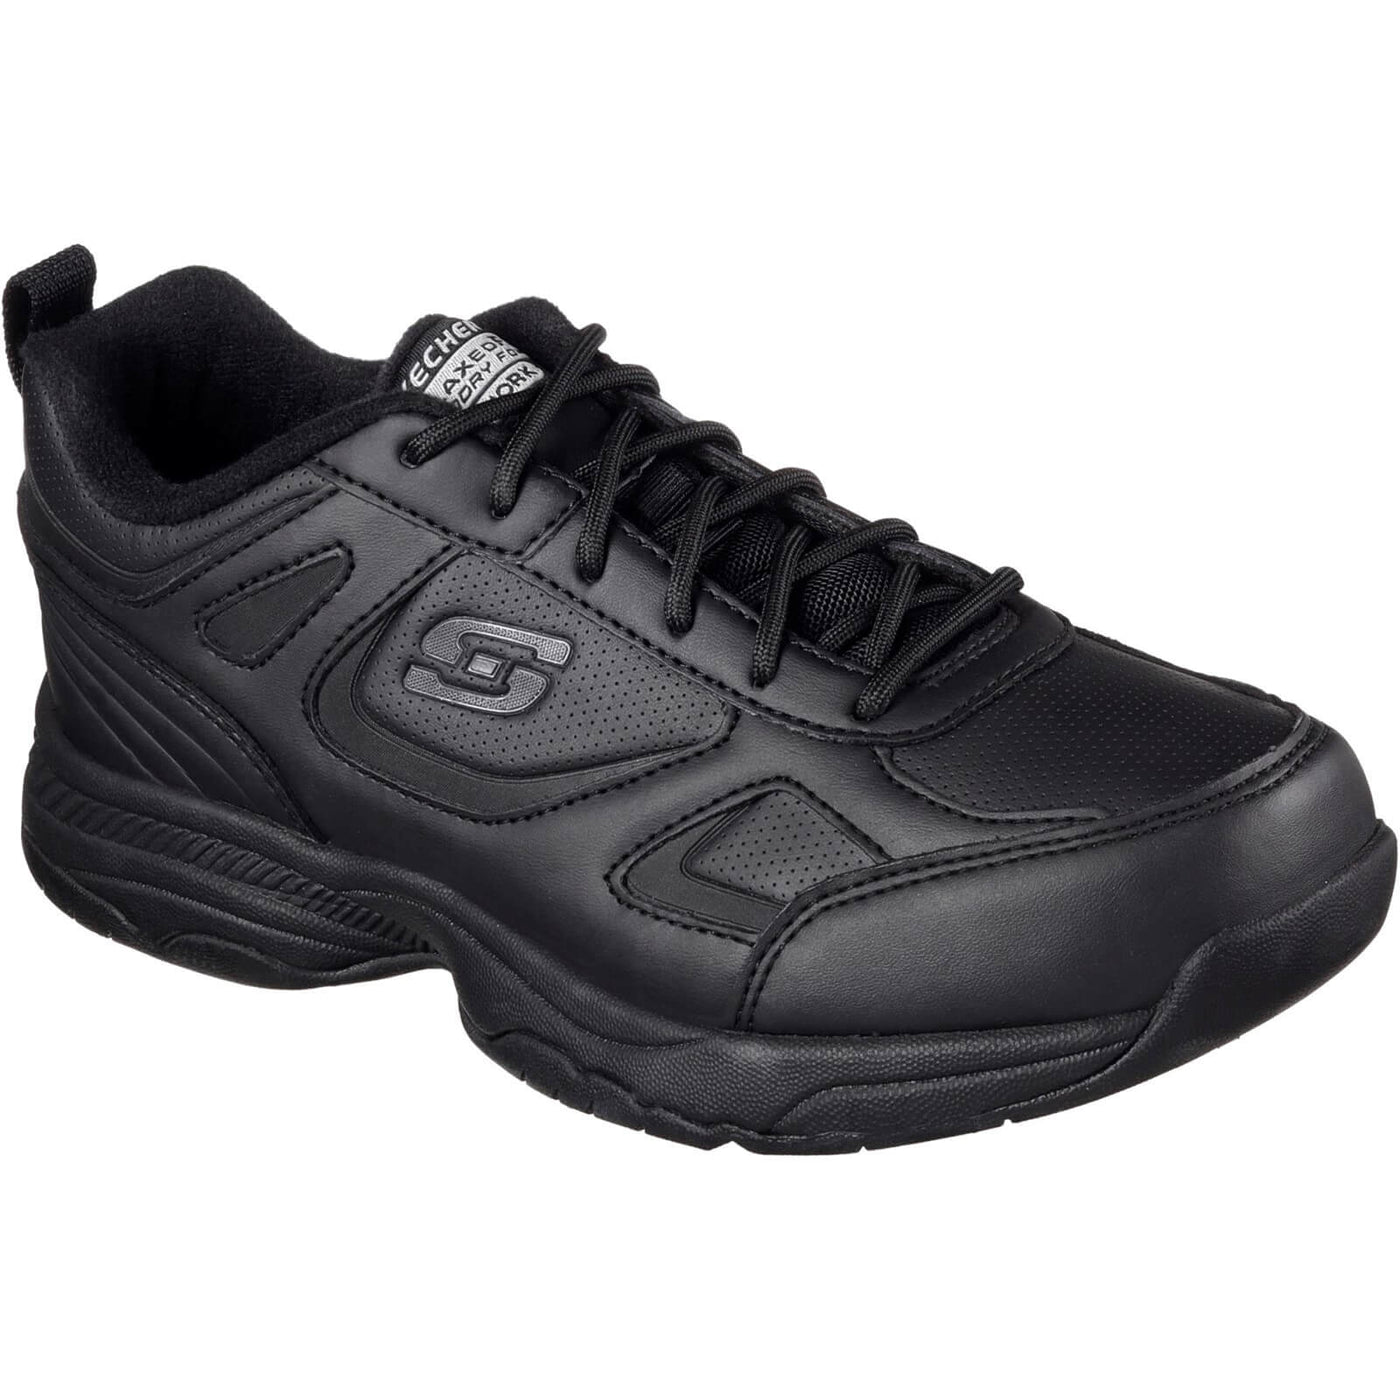 Skechers Work Relaxed Fit: Dighton - Bricelyn SR Safety Shoes Black 1#colour_black